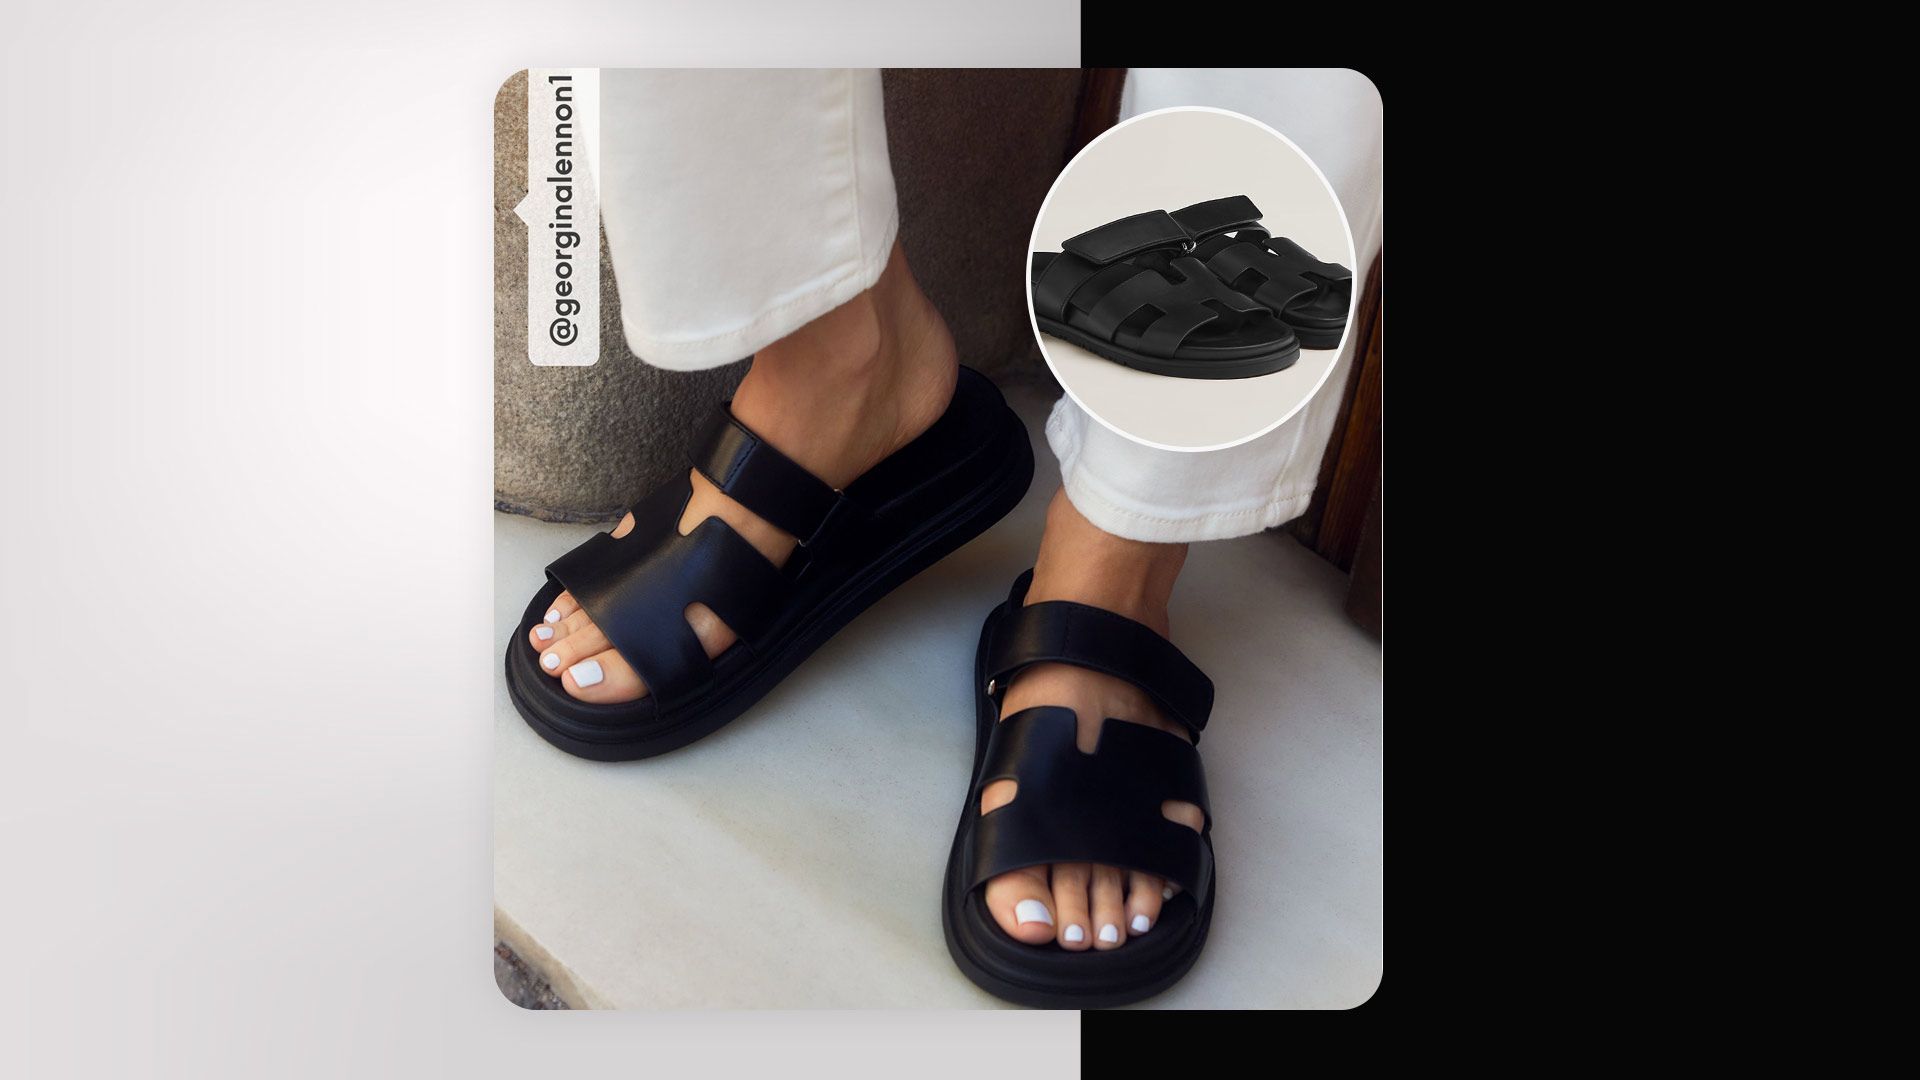 New Look sandals look almost identical to hermes chypre sandals